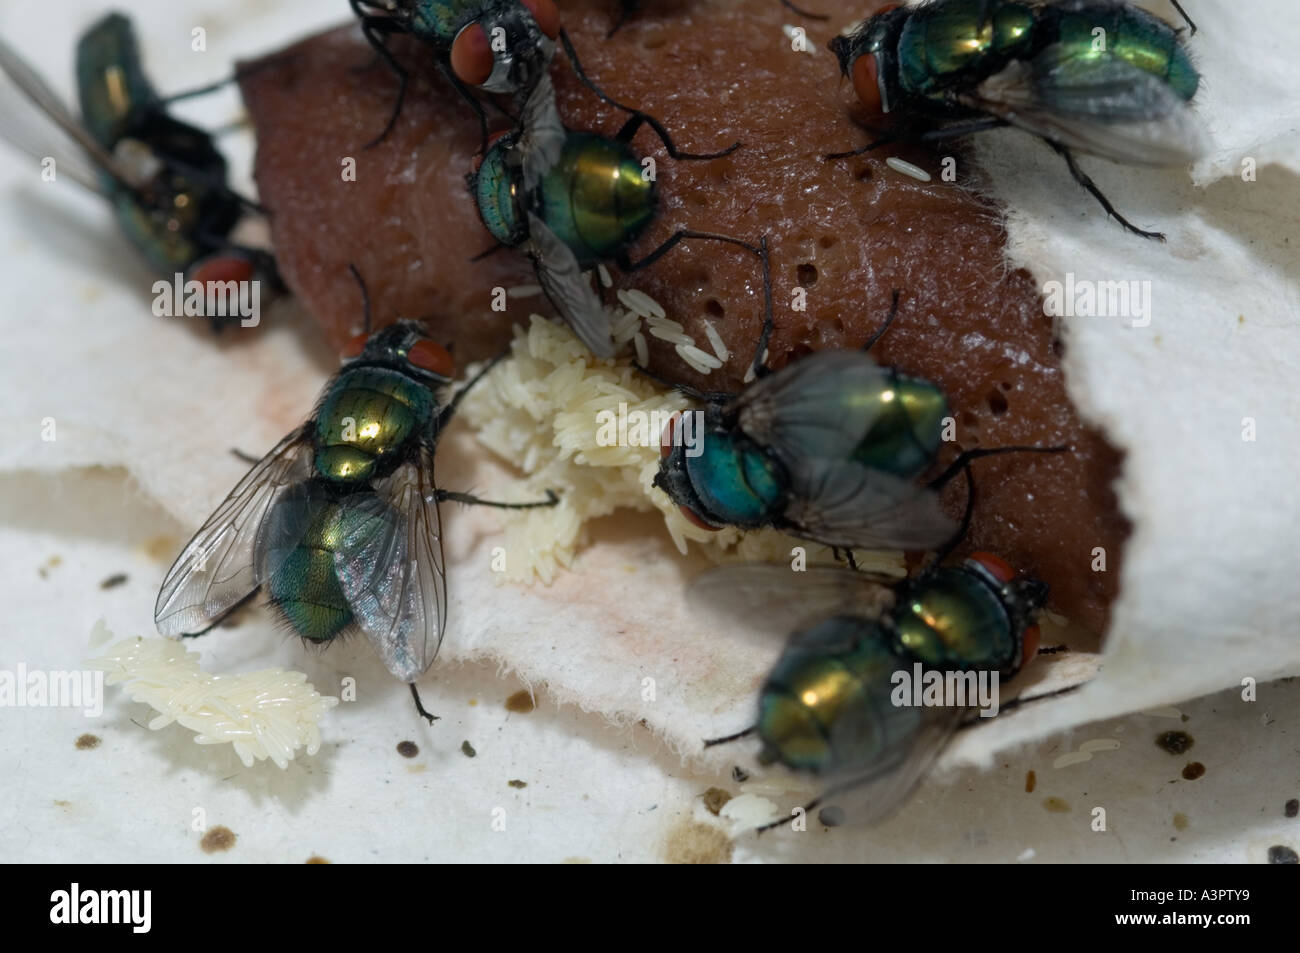 green-bottle-flies-laying-eggs-on-bse-free-liver-at-sterile-maggot-A3PTY9.jpg